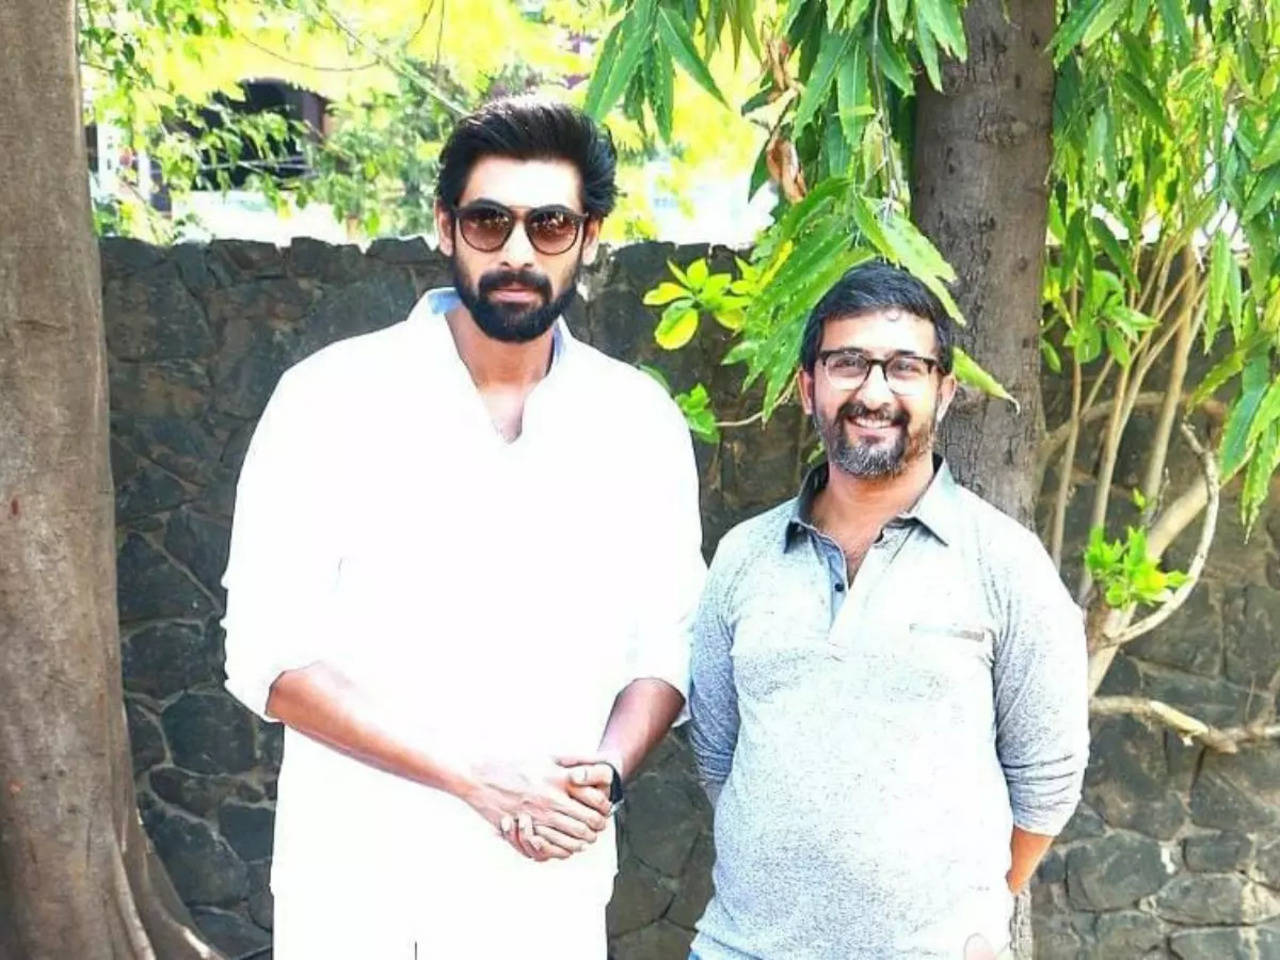 Daggubati Rana who is ready to make a film again under the direction of Teja